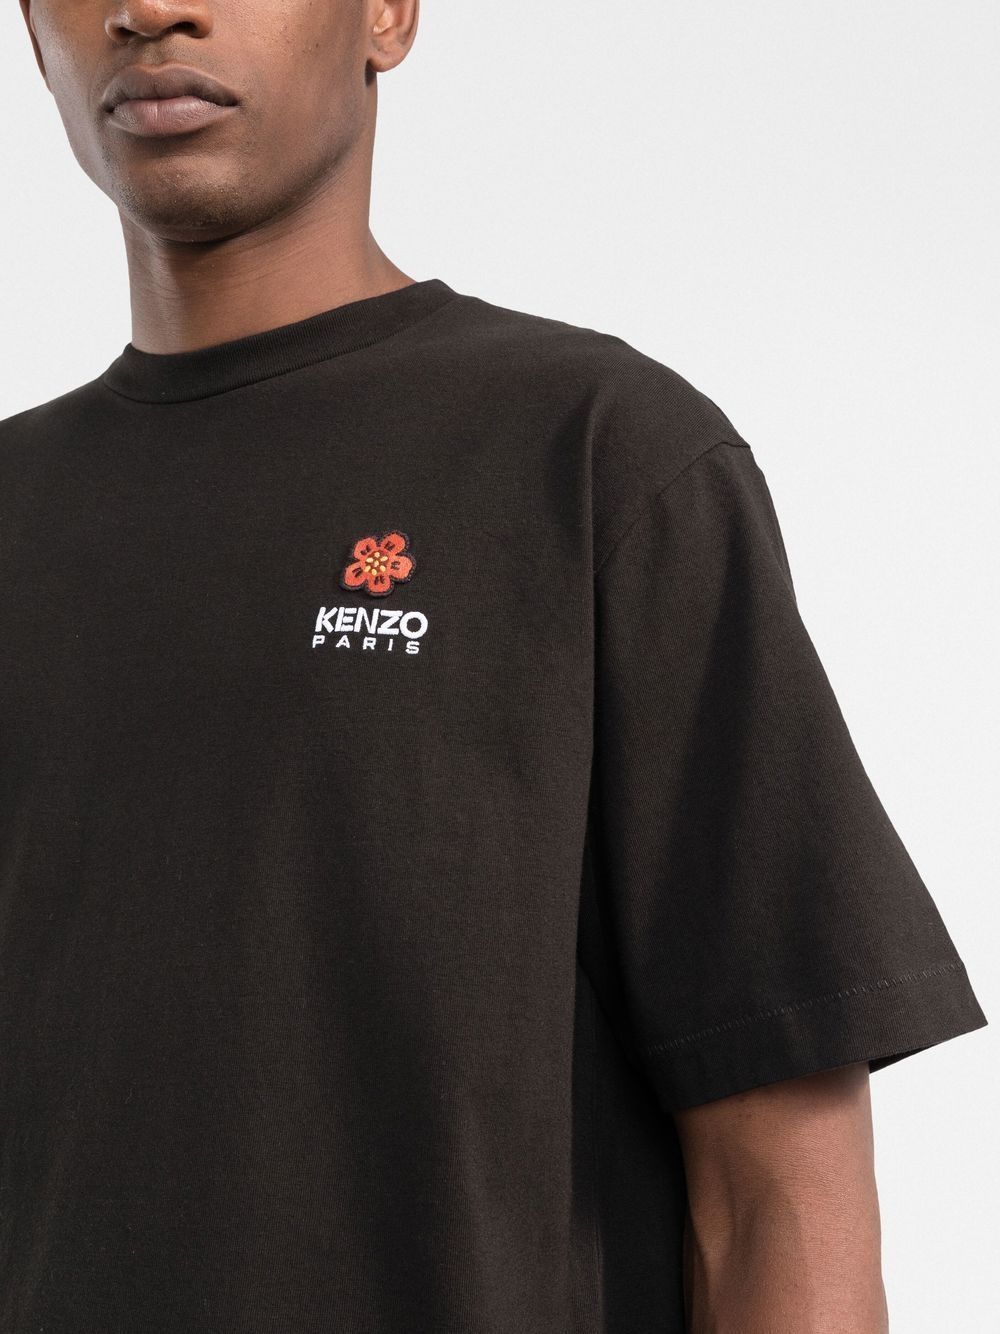 Kenzo Boke Flower Crest T-Shirt Black | Hype Vault Kuala Lumpur | Asia's Top Trusted High-End Sneakers and Streetwear Store | Guaranteed 100% authentic